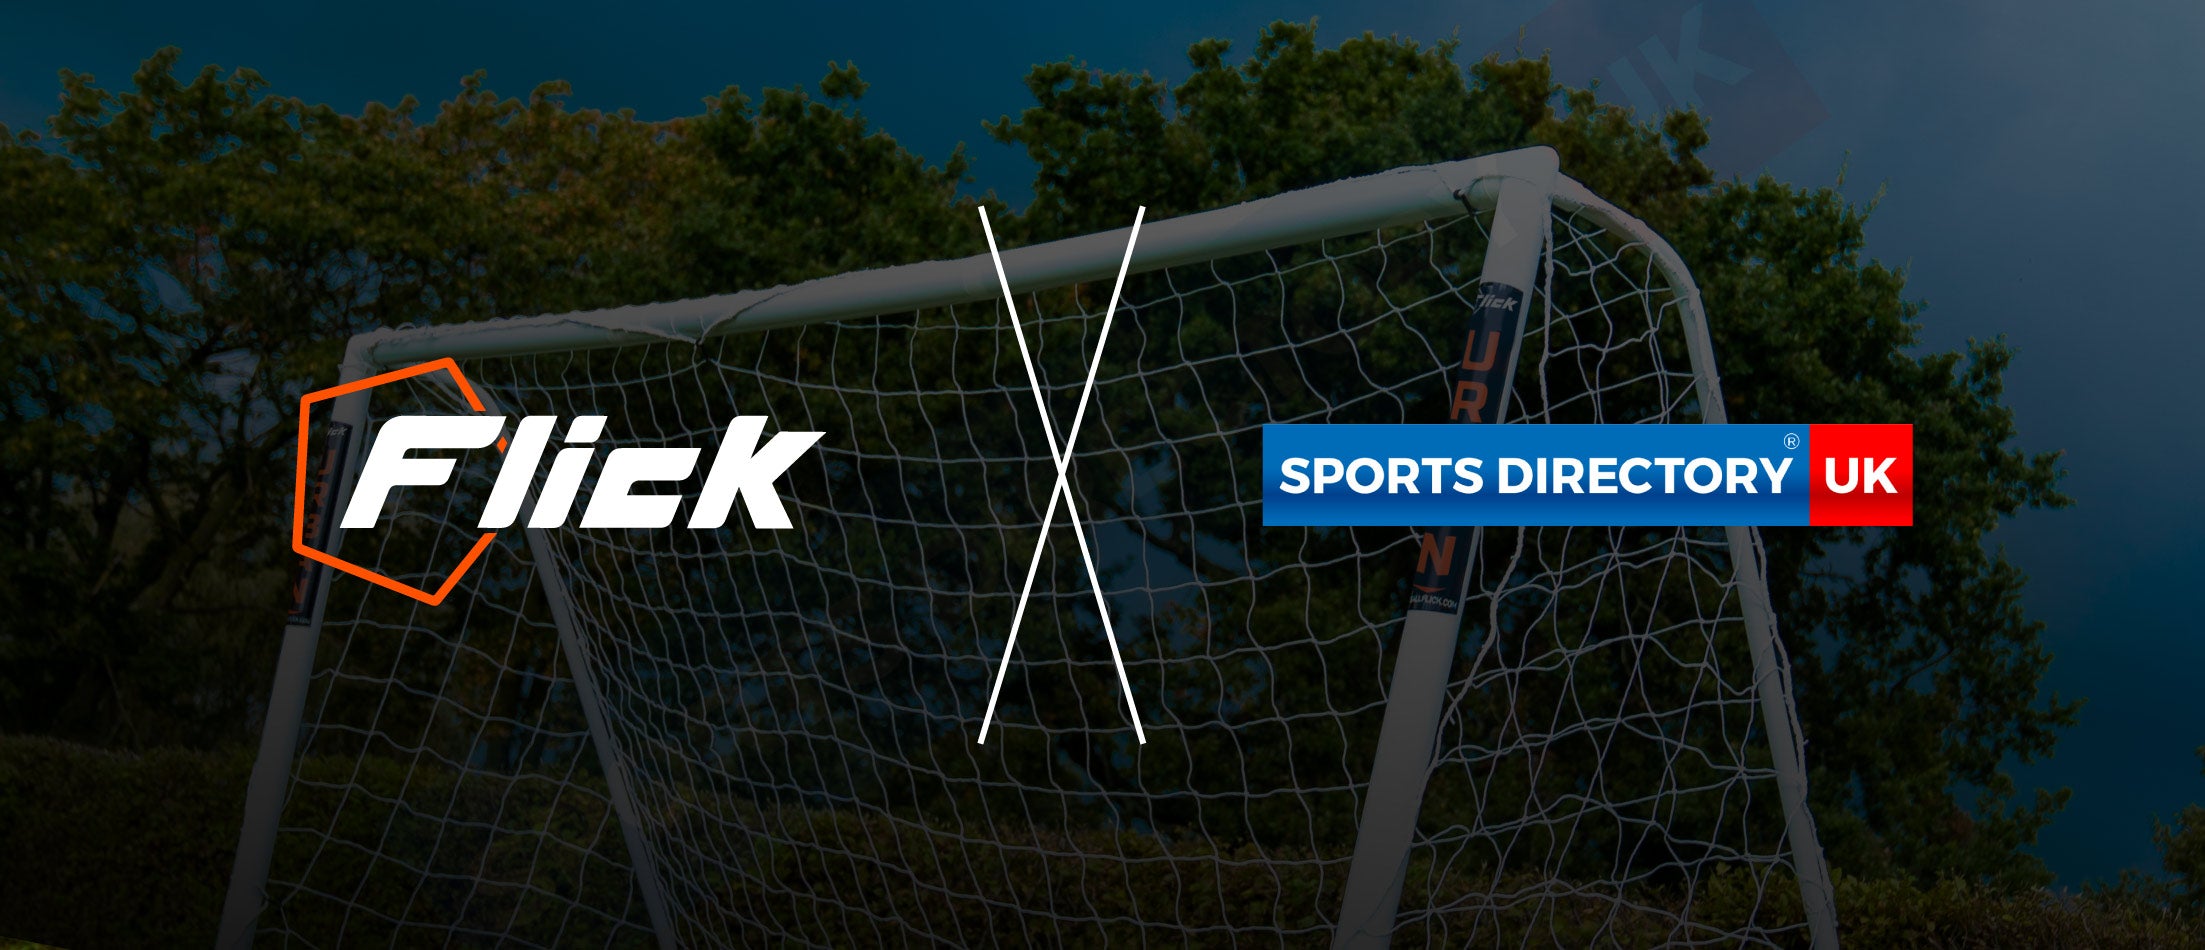 Flick Widen Partnership With Sports Directory